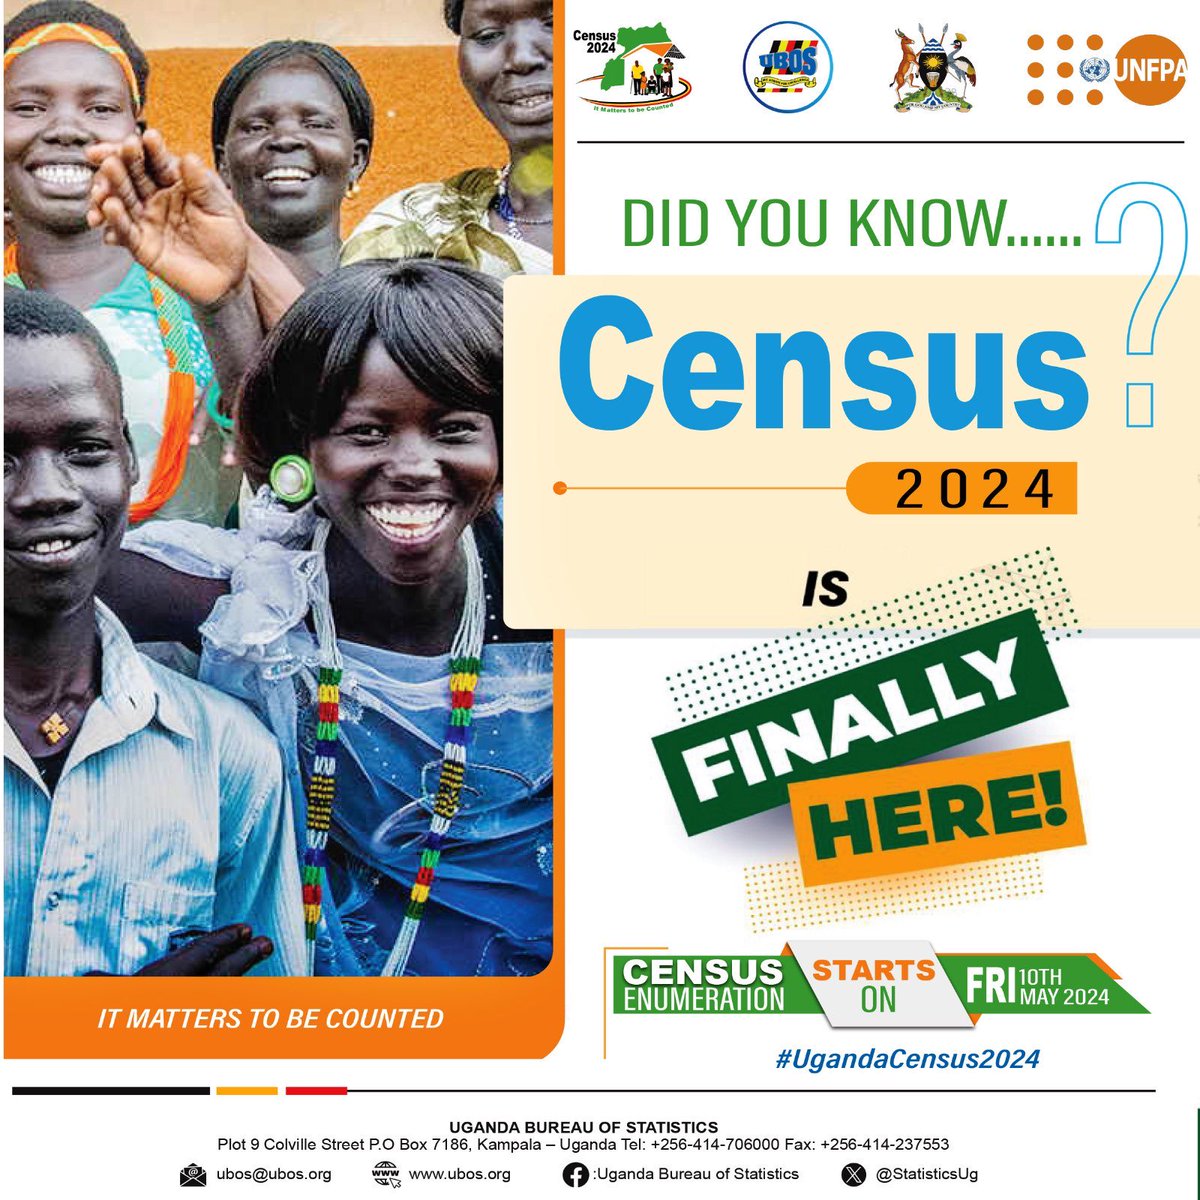 Mwe, Census is back and it starts on Friday, 10th May 2024. Please make sure you are counted ba dear.🌝 It matters to be counted. Because; ✓Your presence is then known, allowing for accurate representation in decision-making processes & resource allocation. #UgandaCensus2024